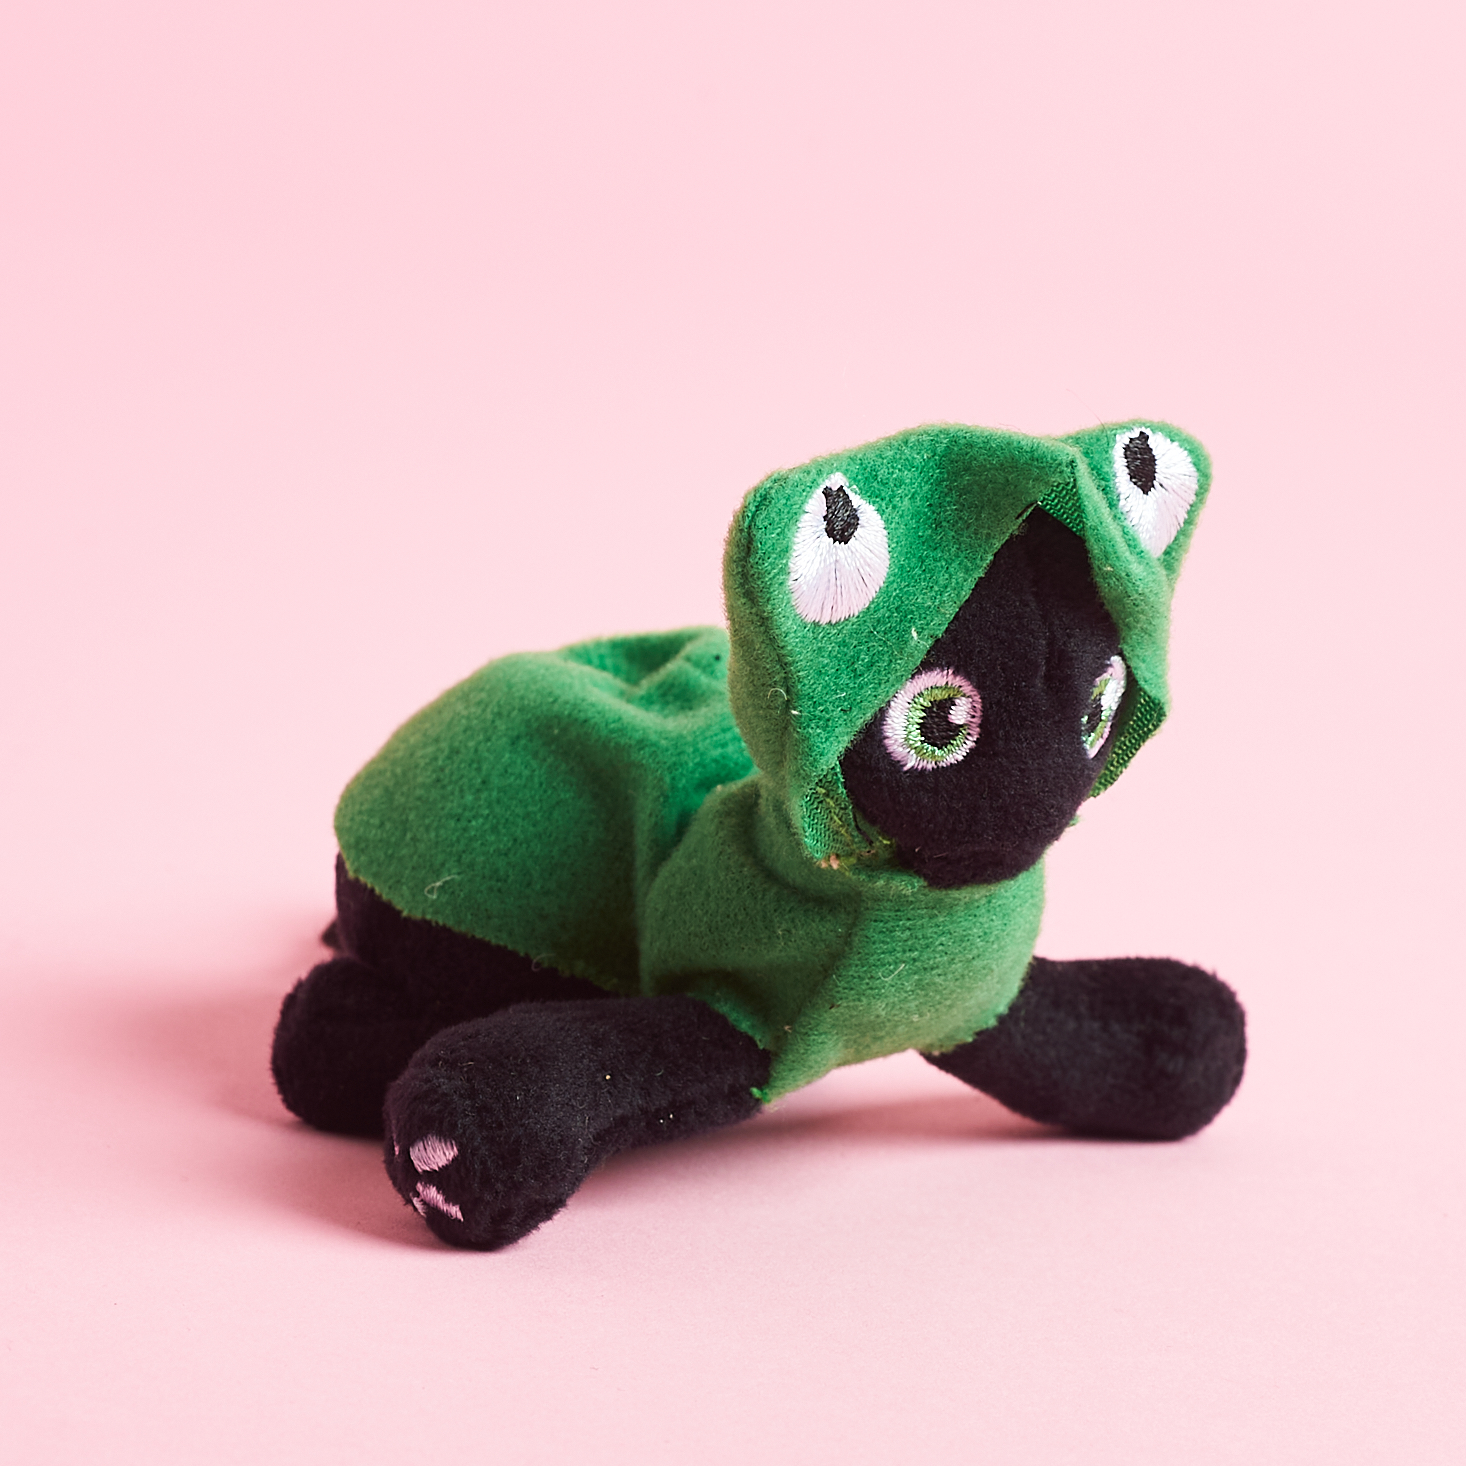 black cat toy wearing frog costume